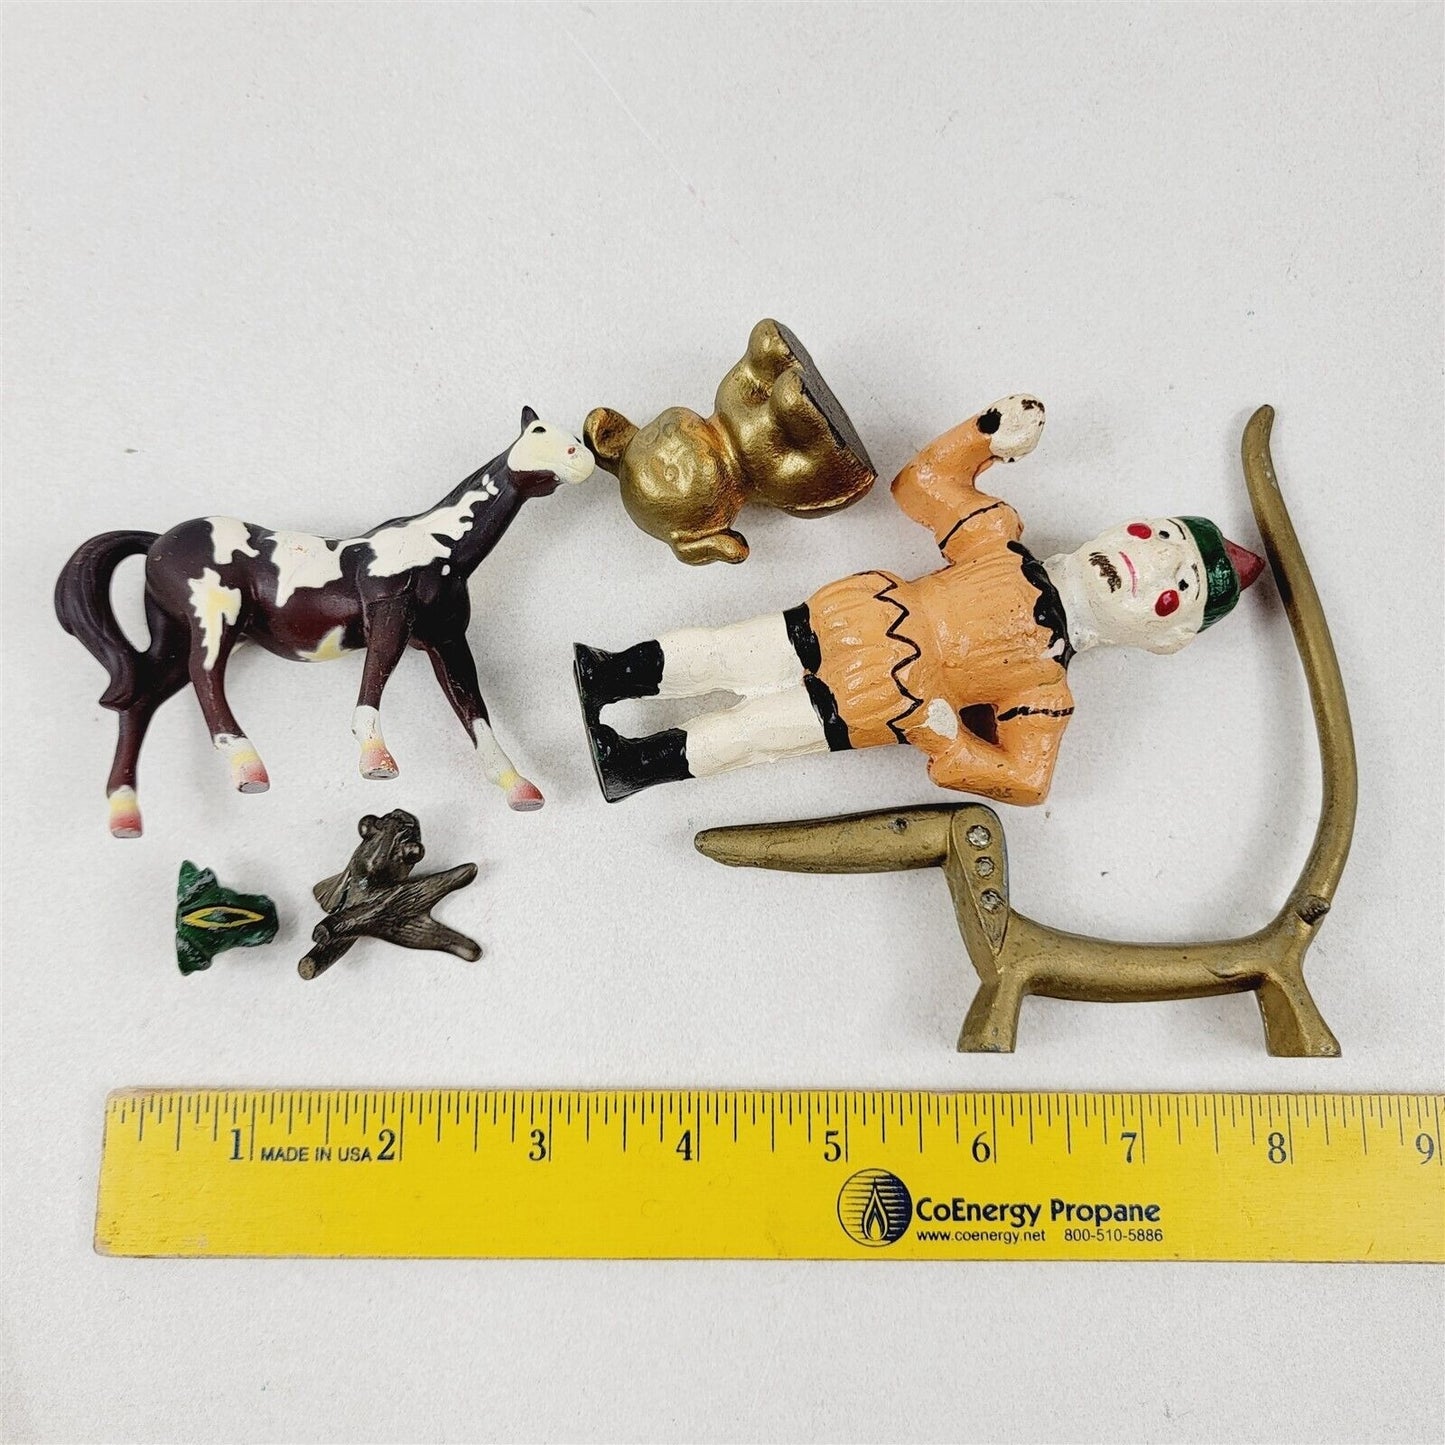 6 Pc Vintage Lot of Cast Iron Metal Figurines Animals Frog Dog Horse Clown Fish